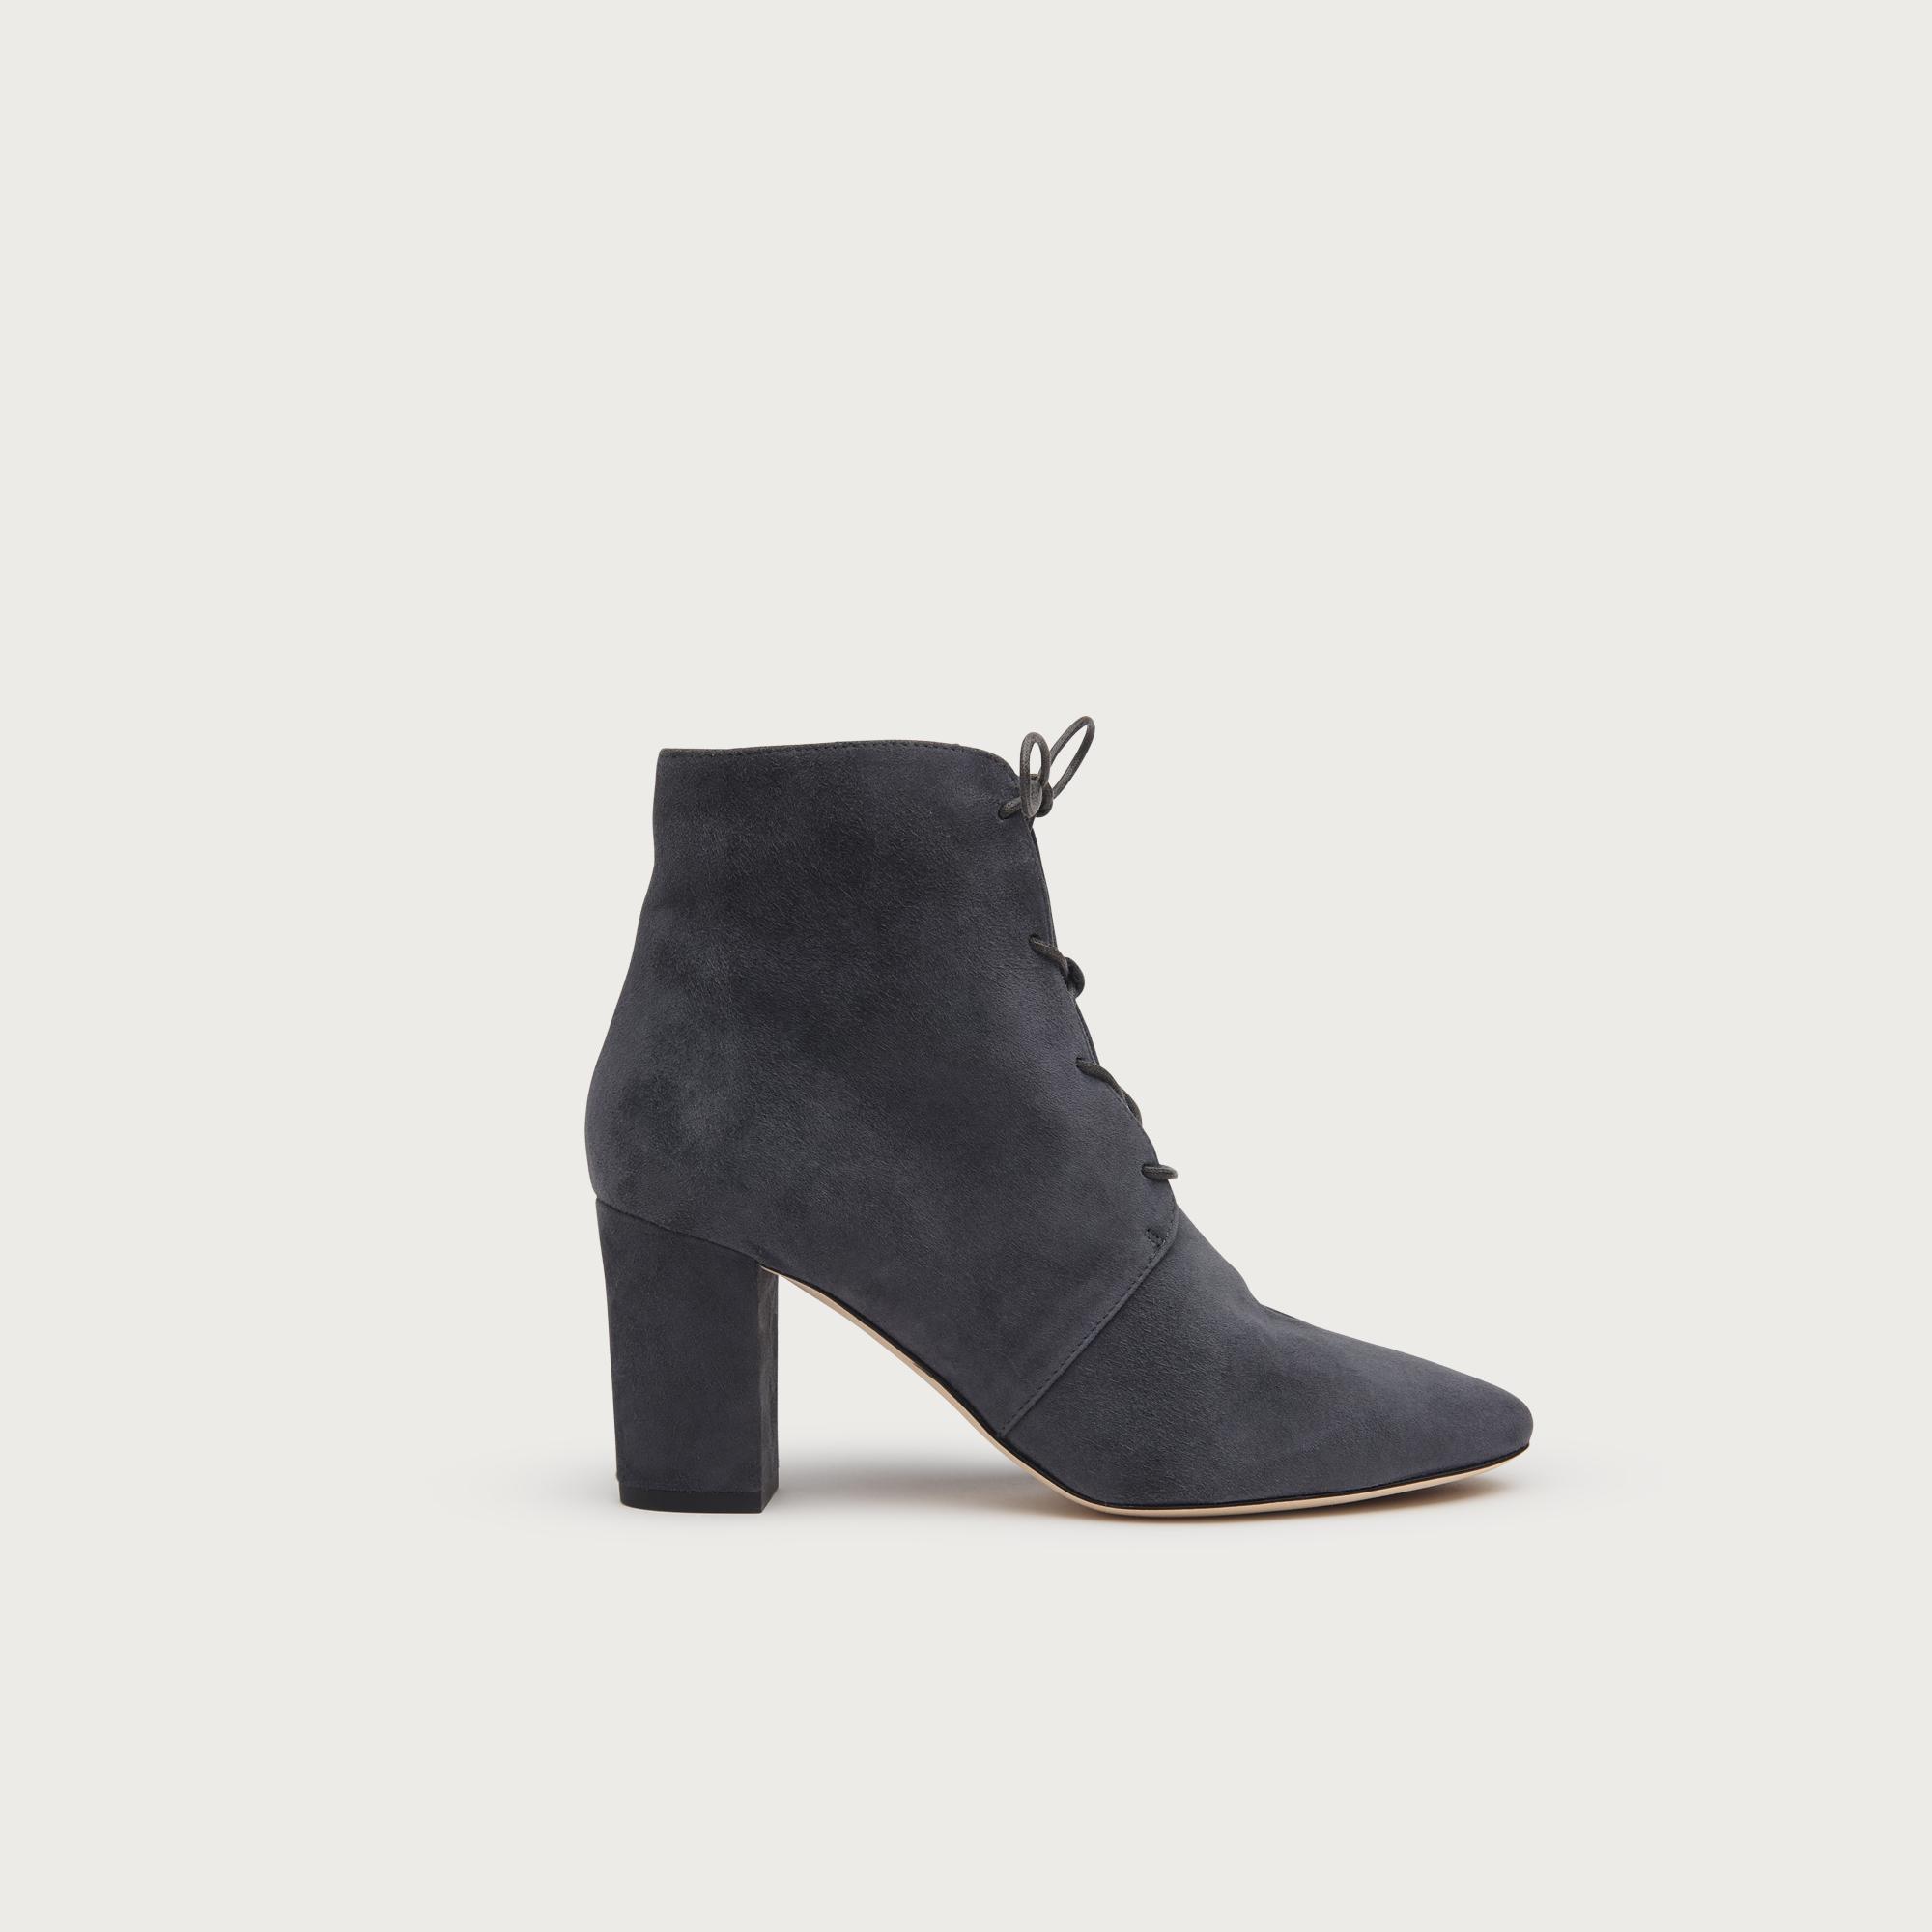 grey suede ankle boots uk